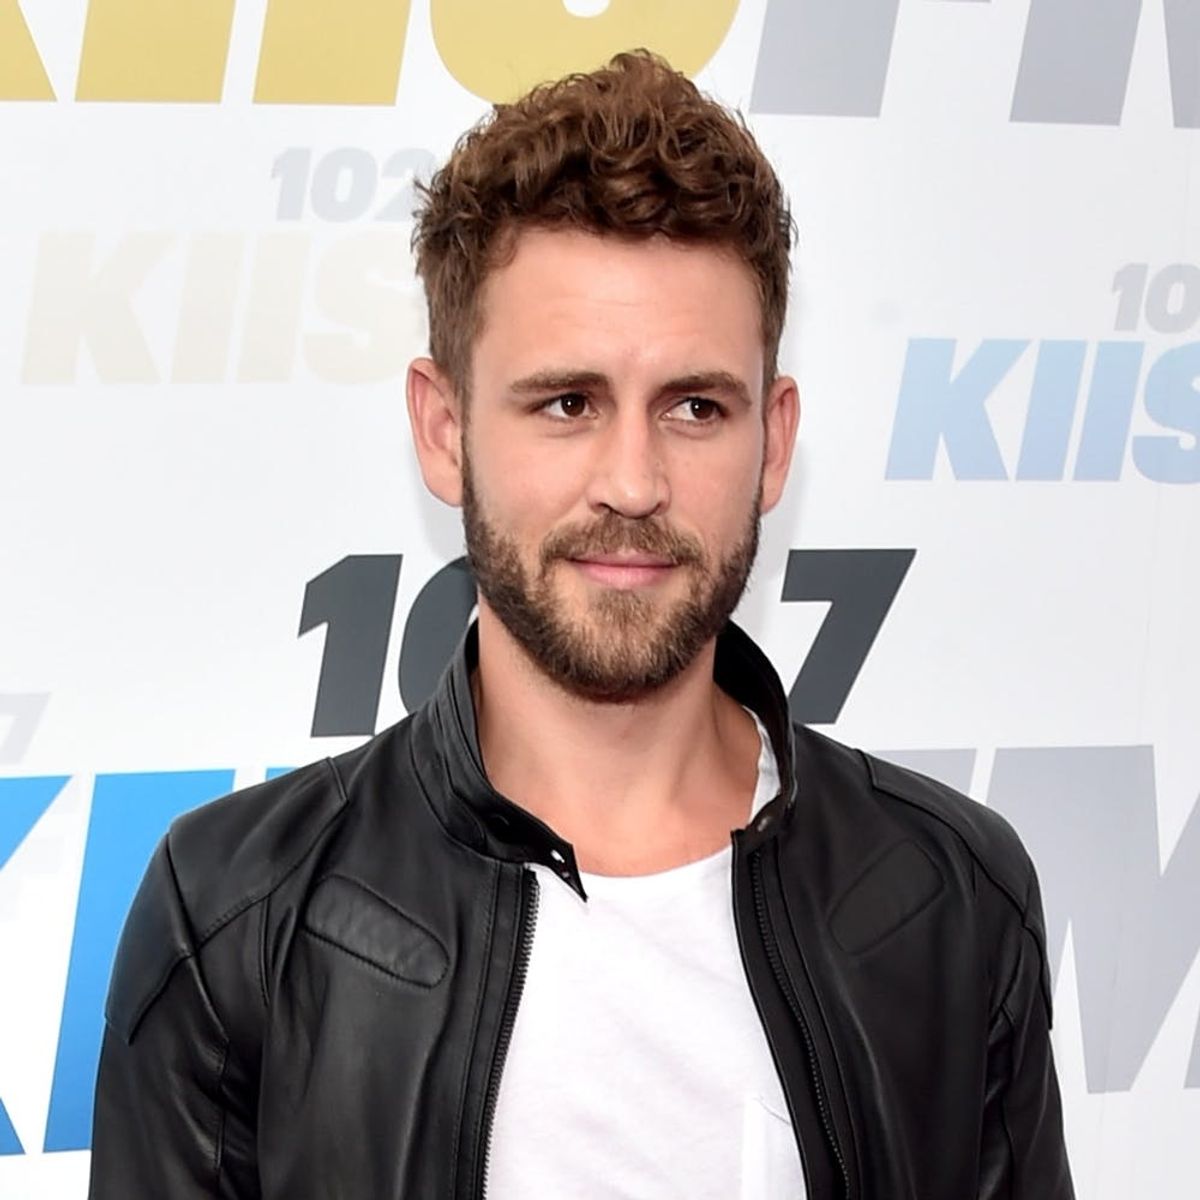 Here’s Your First Official Scream-Worthy Look at Nick Viall As The Bachelor